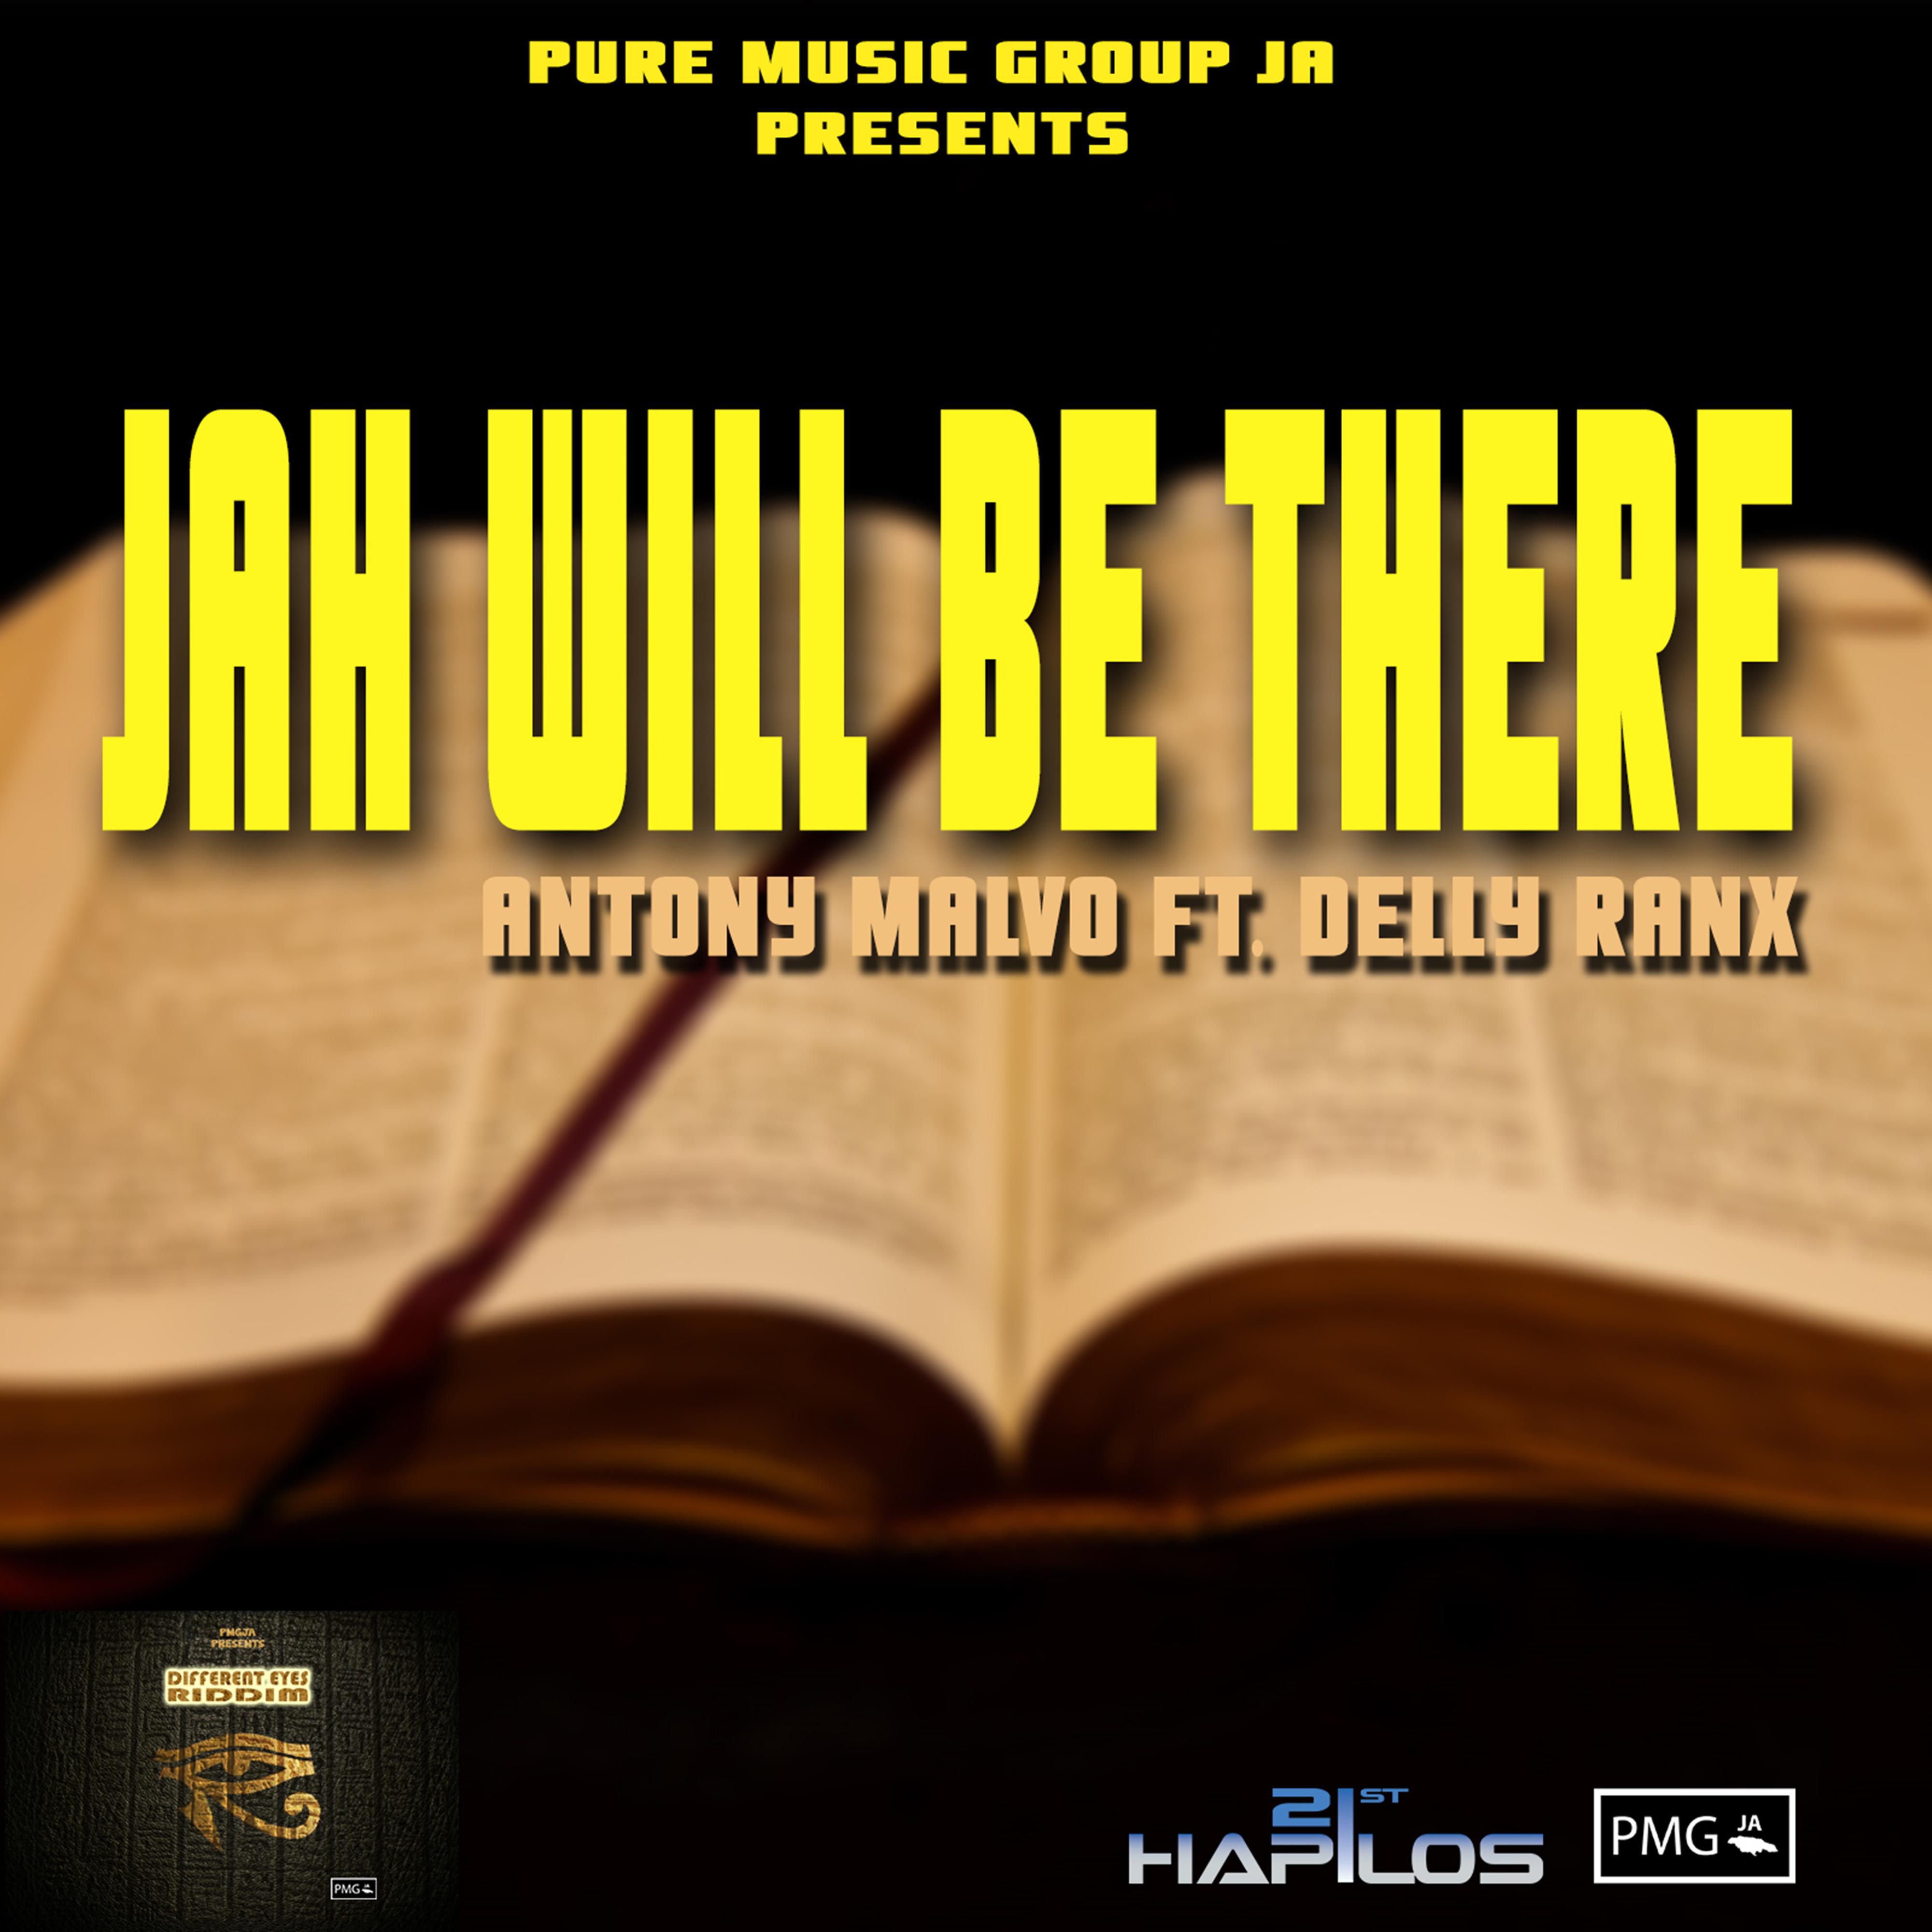 Jah Will Be There - Single